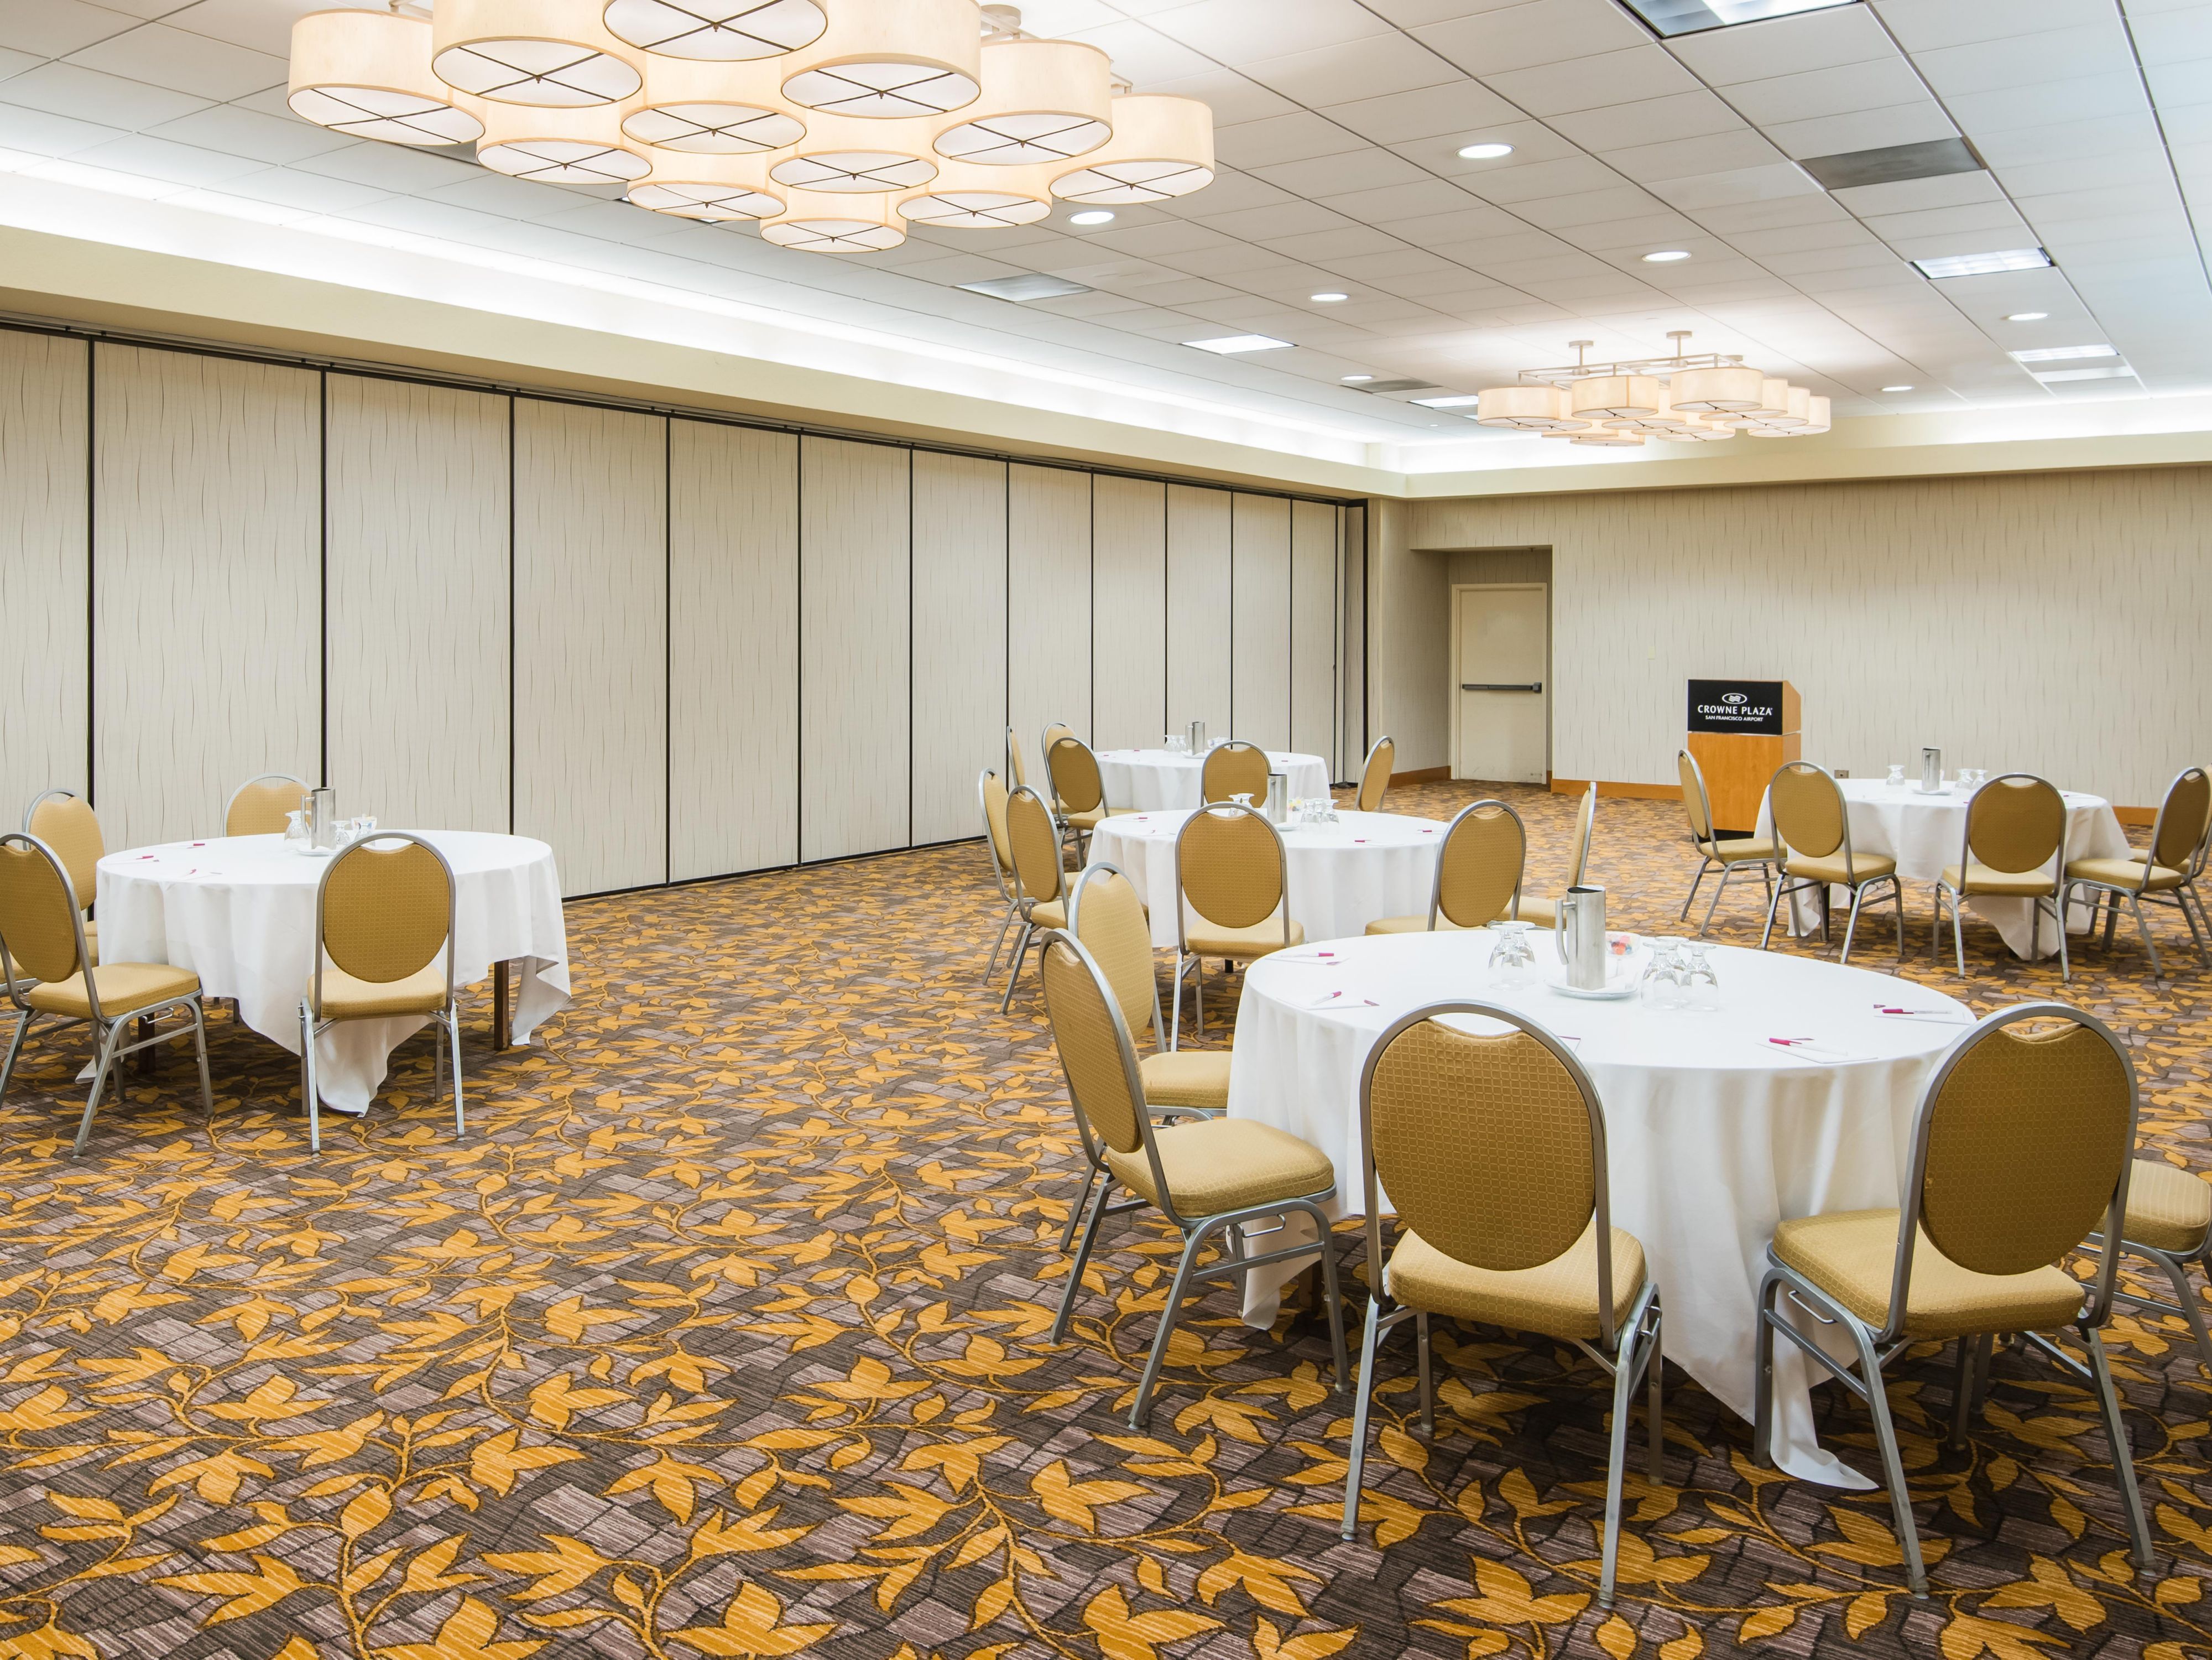 Plan your Quinceanera at the Crowne Plaza SFO hotel in our beautiful Plaza Ballroom. Let us help you enjoy the perfect 15th birthday celebration for your princess! Hotel is located close to Burlingame, South San Francisco and the bay.